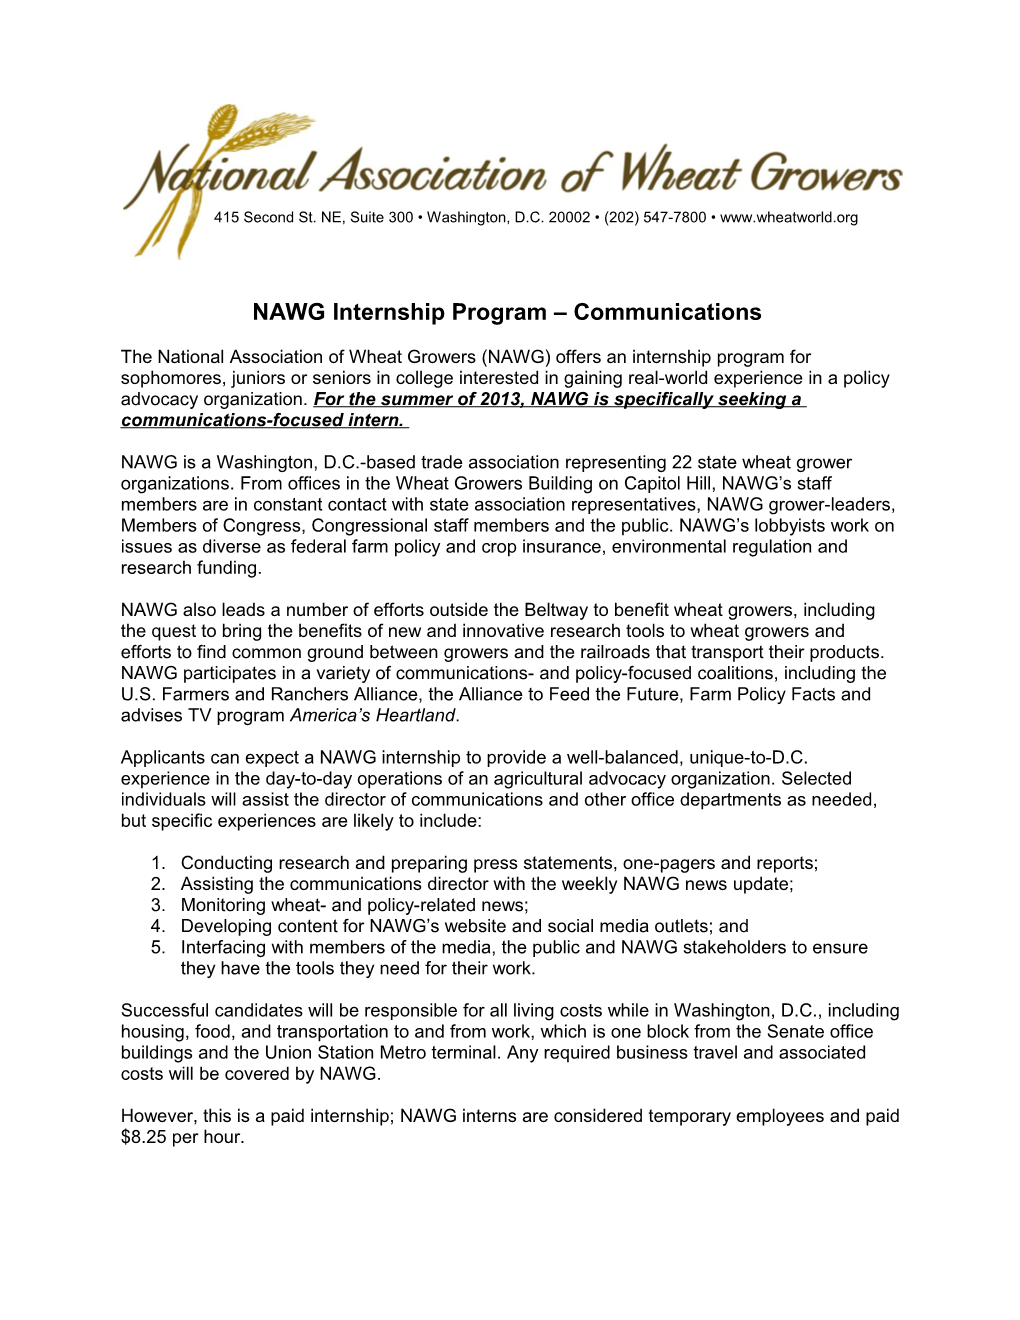 National Association Of Wheat Growers